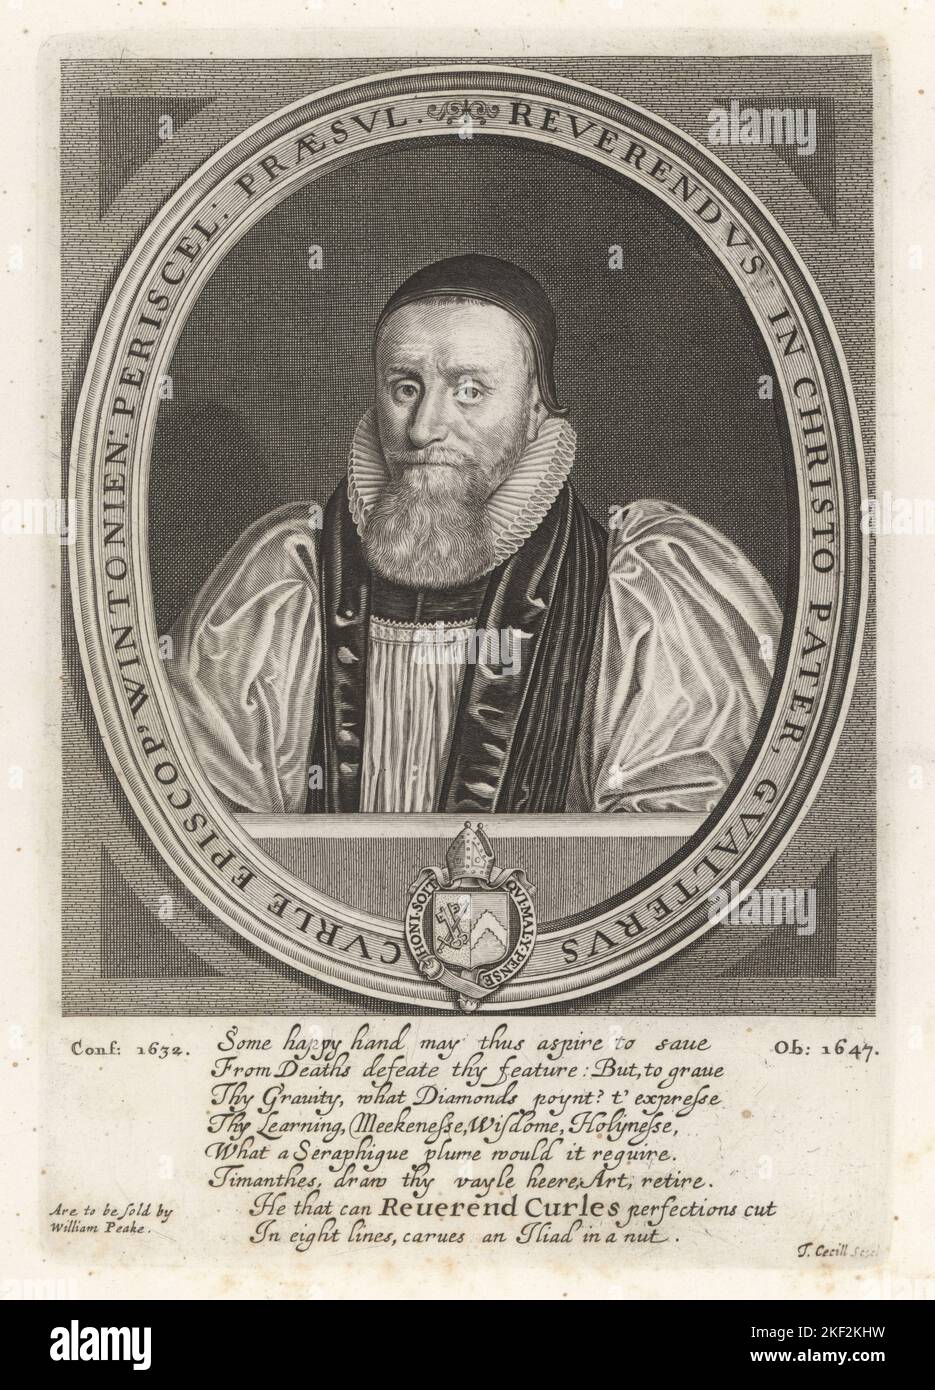 Walter Curle, Bishop of Winchester, English theologian. In skull cap, ruff collar and ecclesiastical robes, 1575-1647. Gualterus Curle Episco Wintonien. Original plate by Thomas Cecill, with eight English verses sold by WIlliam Peake. Copperplate engraving from Samuel Woodburn’s Gallery of Rare Portraits Consisting of Original Plates, George Jones, 102 St Martin’s Lane, London, 1816. Stock Photo